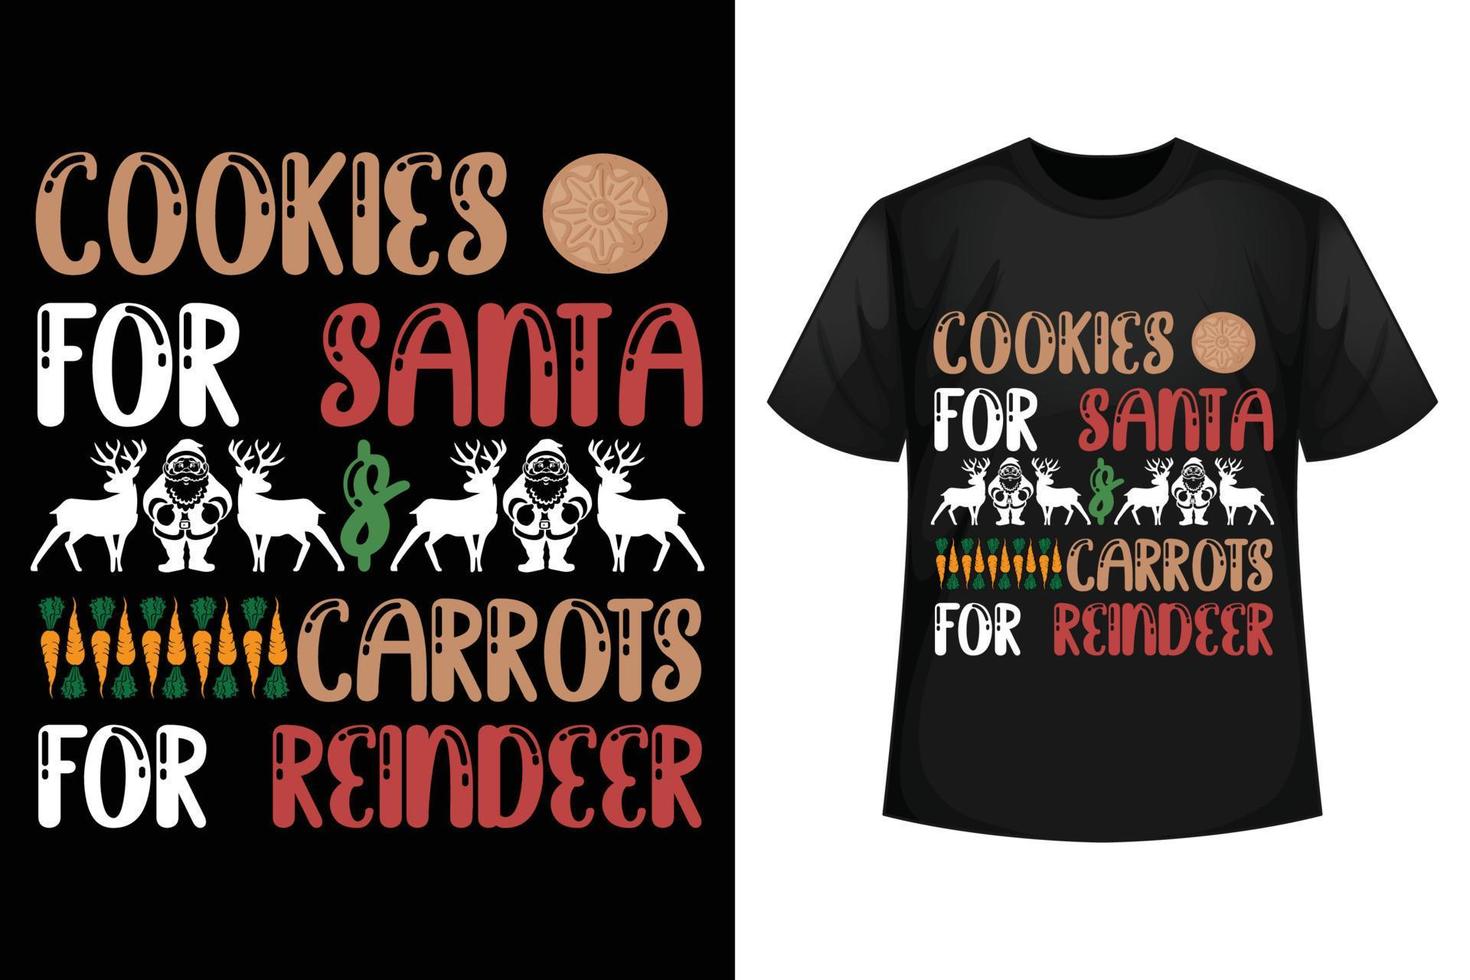 Cookies for Santa and carrots for reindeer - Christmas t-shirt design template vector